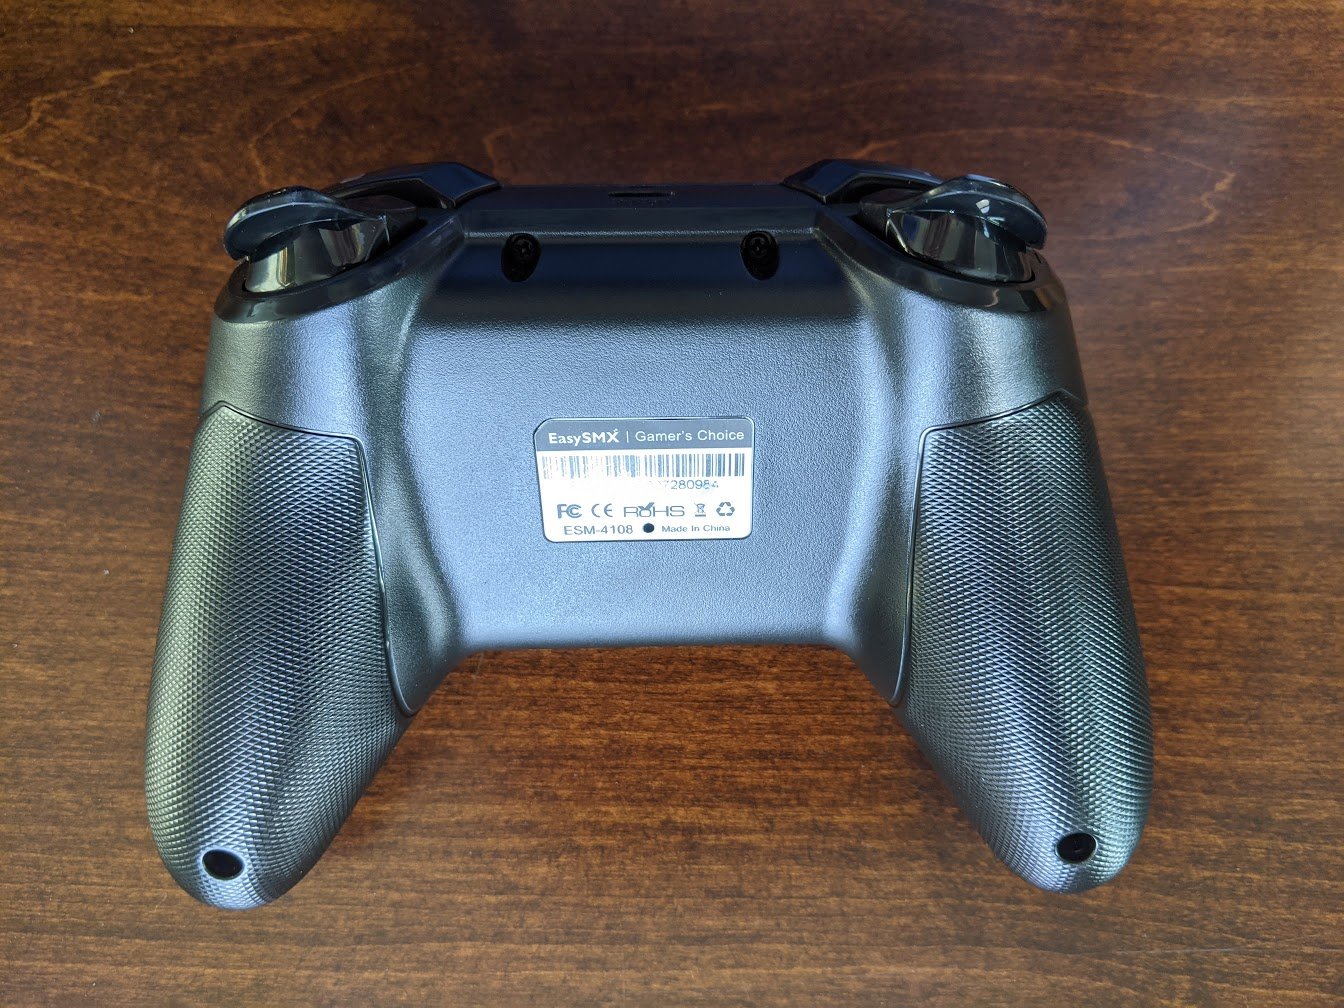 Easysmx Switch Controller Backside